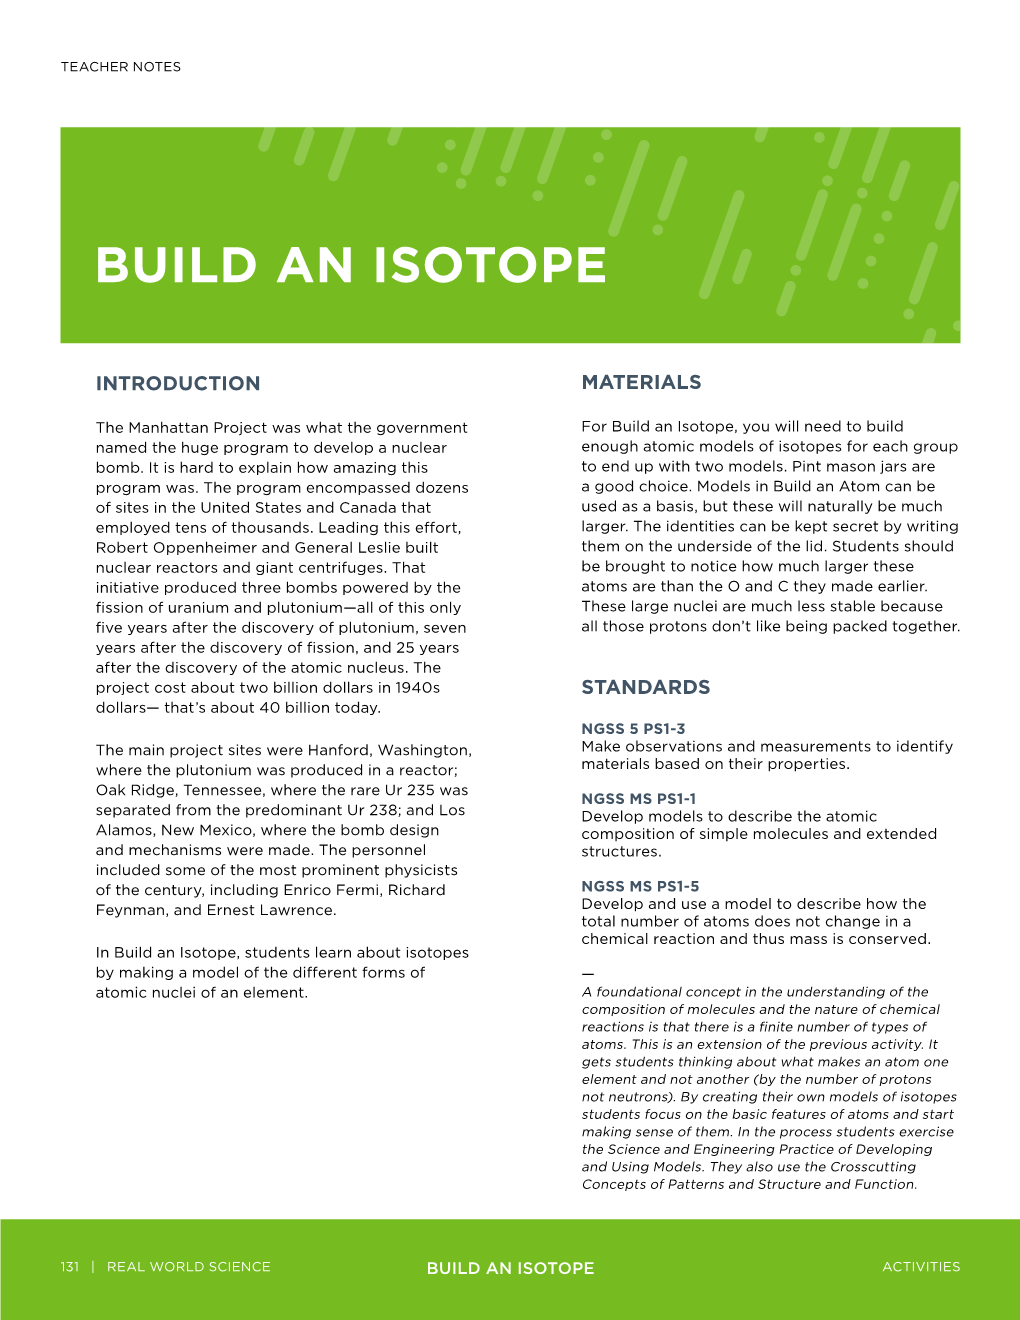 Build an Isotope